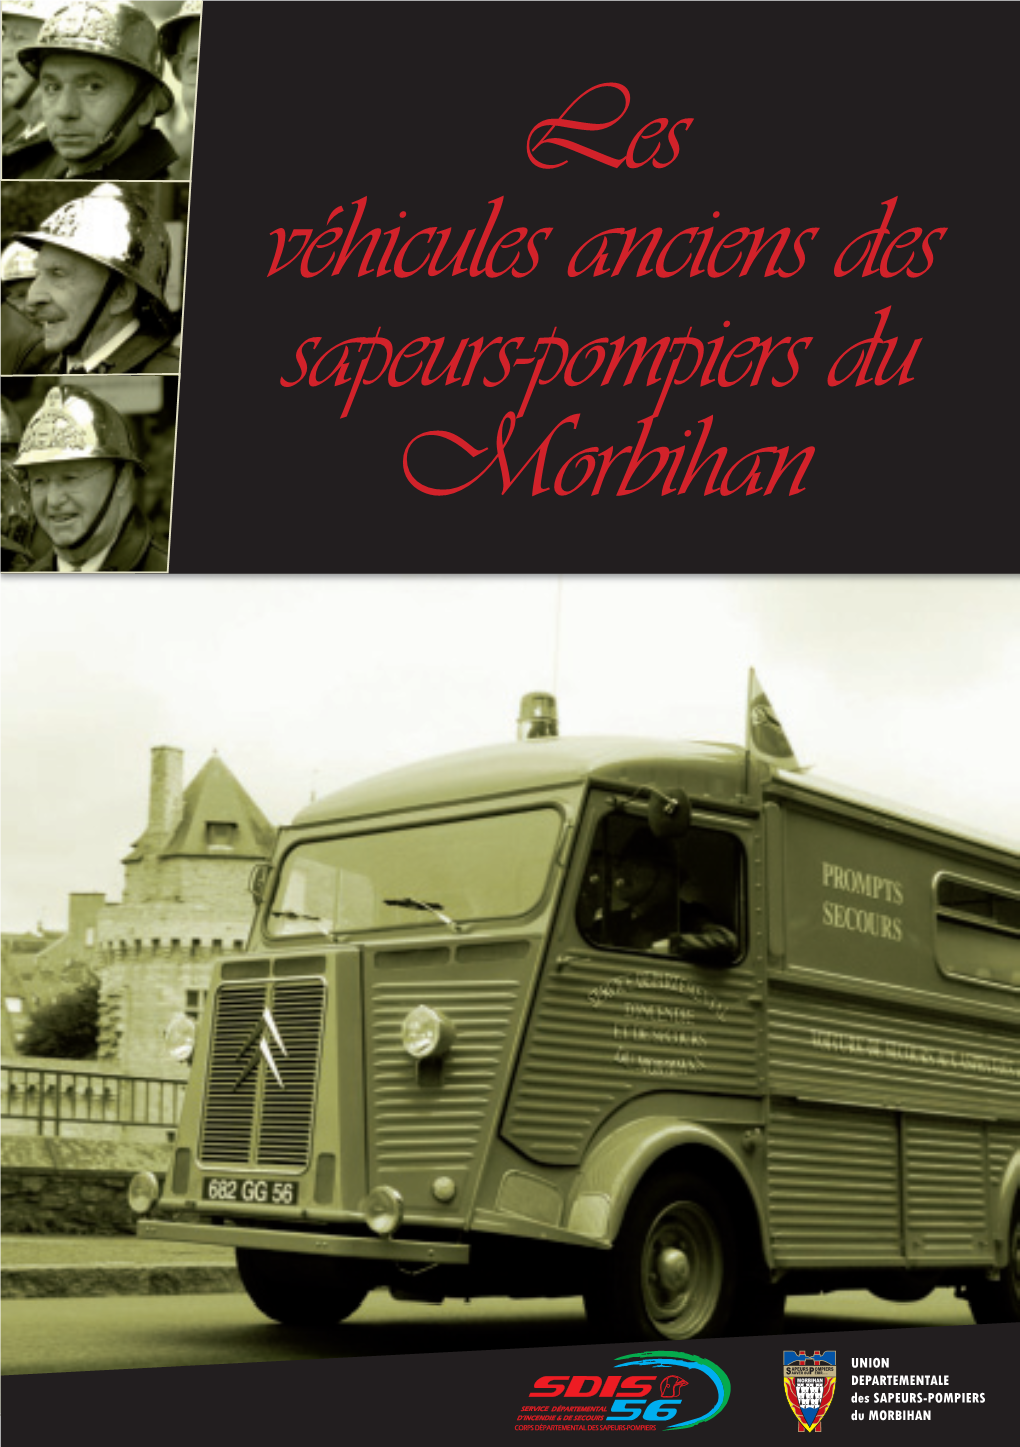 Anciens Véhicules Pompiers.Indd